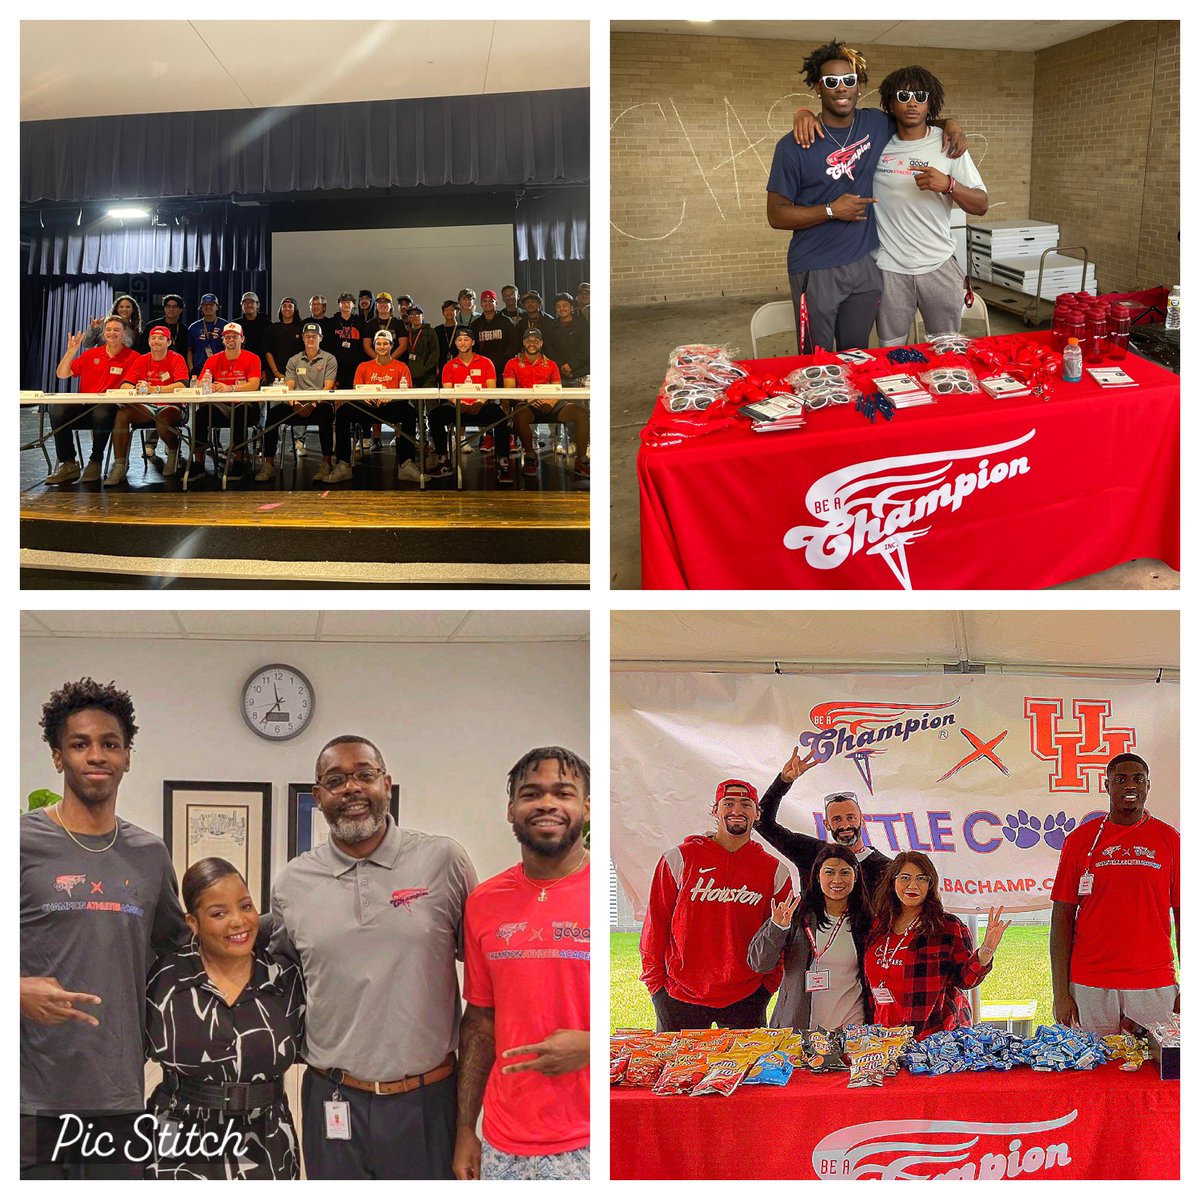 For college athletes, Easter often means training and preparing for their next game. 

Let's support them as they work hard to achieve their goals. 🏆🏆🙏🏾❤️ #CollegeAthletes #Easter  @UHCougarBB @UHCougars @UHCougarMBK @UHVolleyball @TSUFootball @UTRGVmbb @ACU_MBB